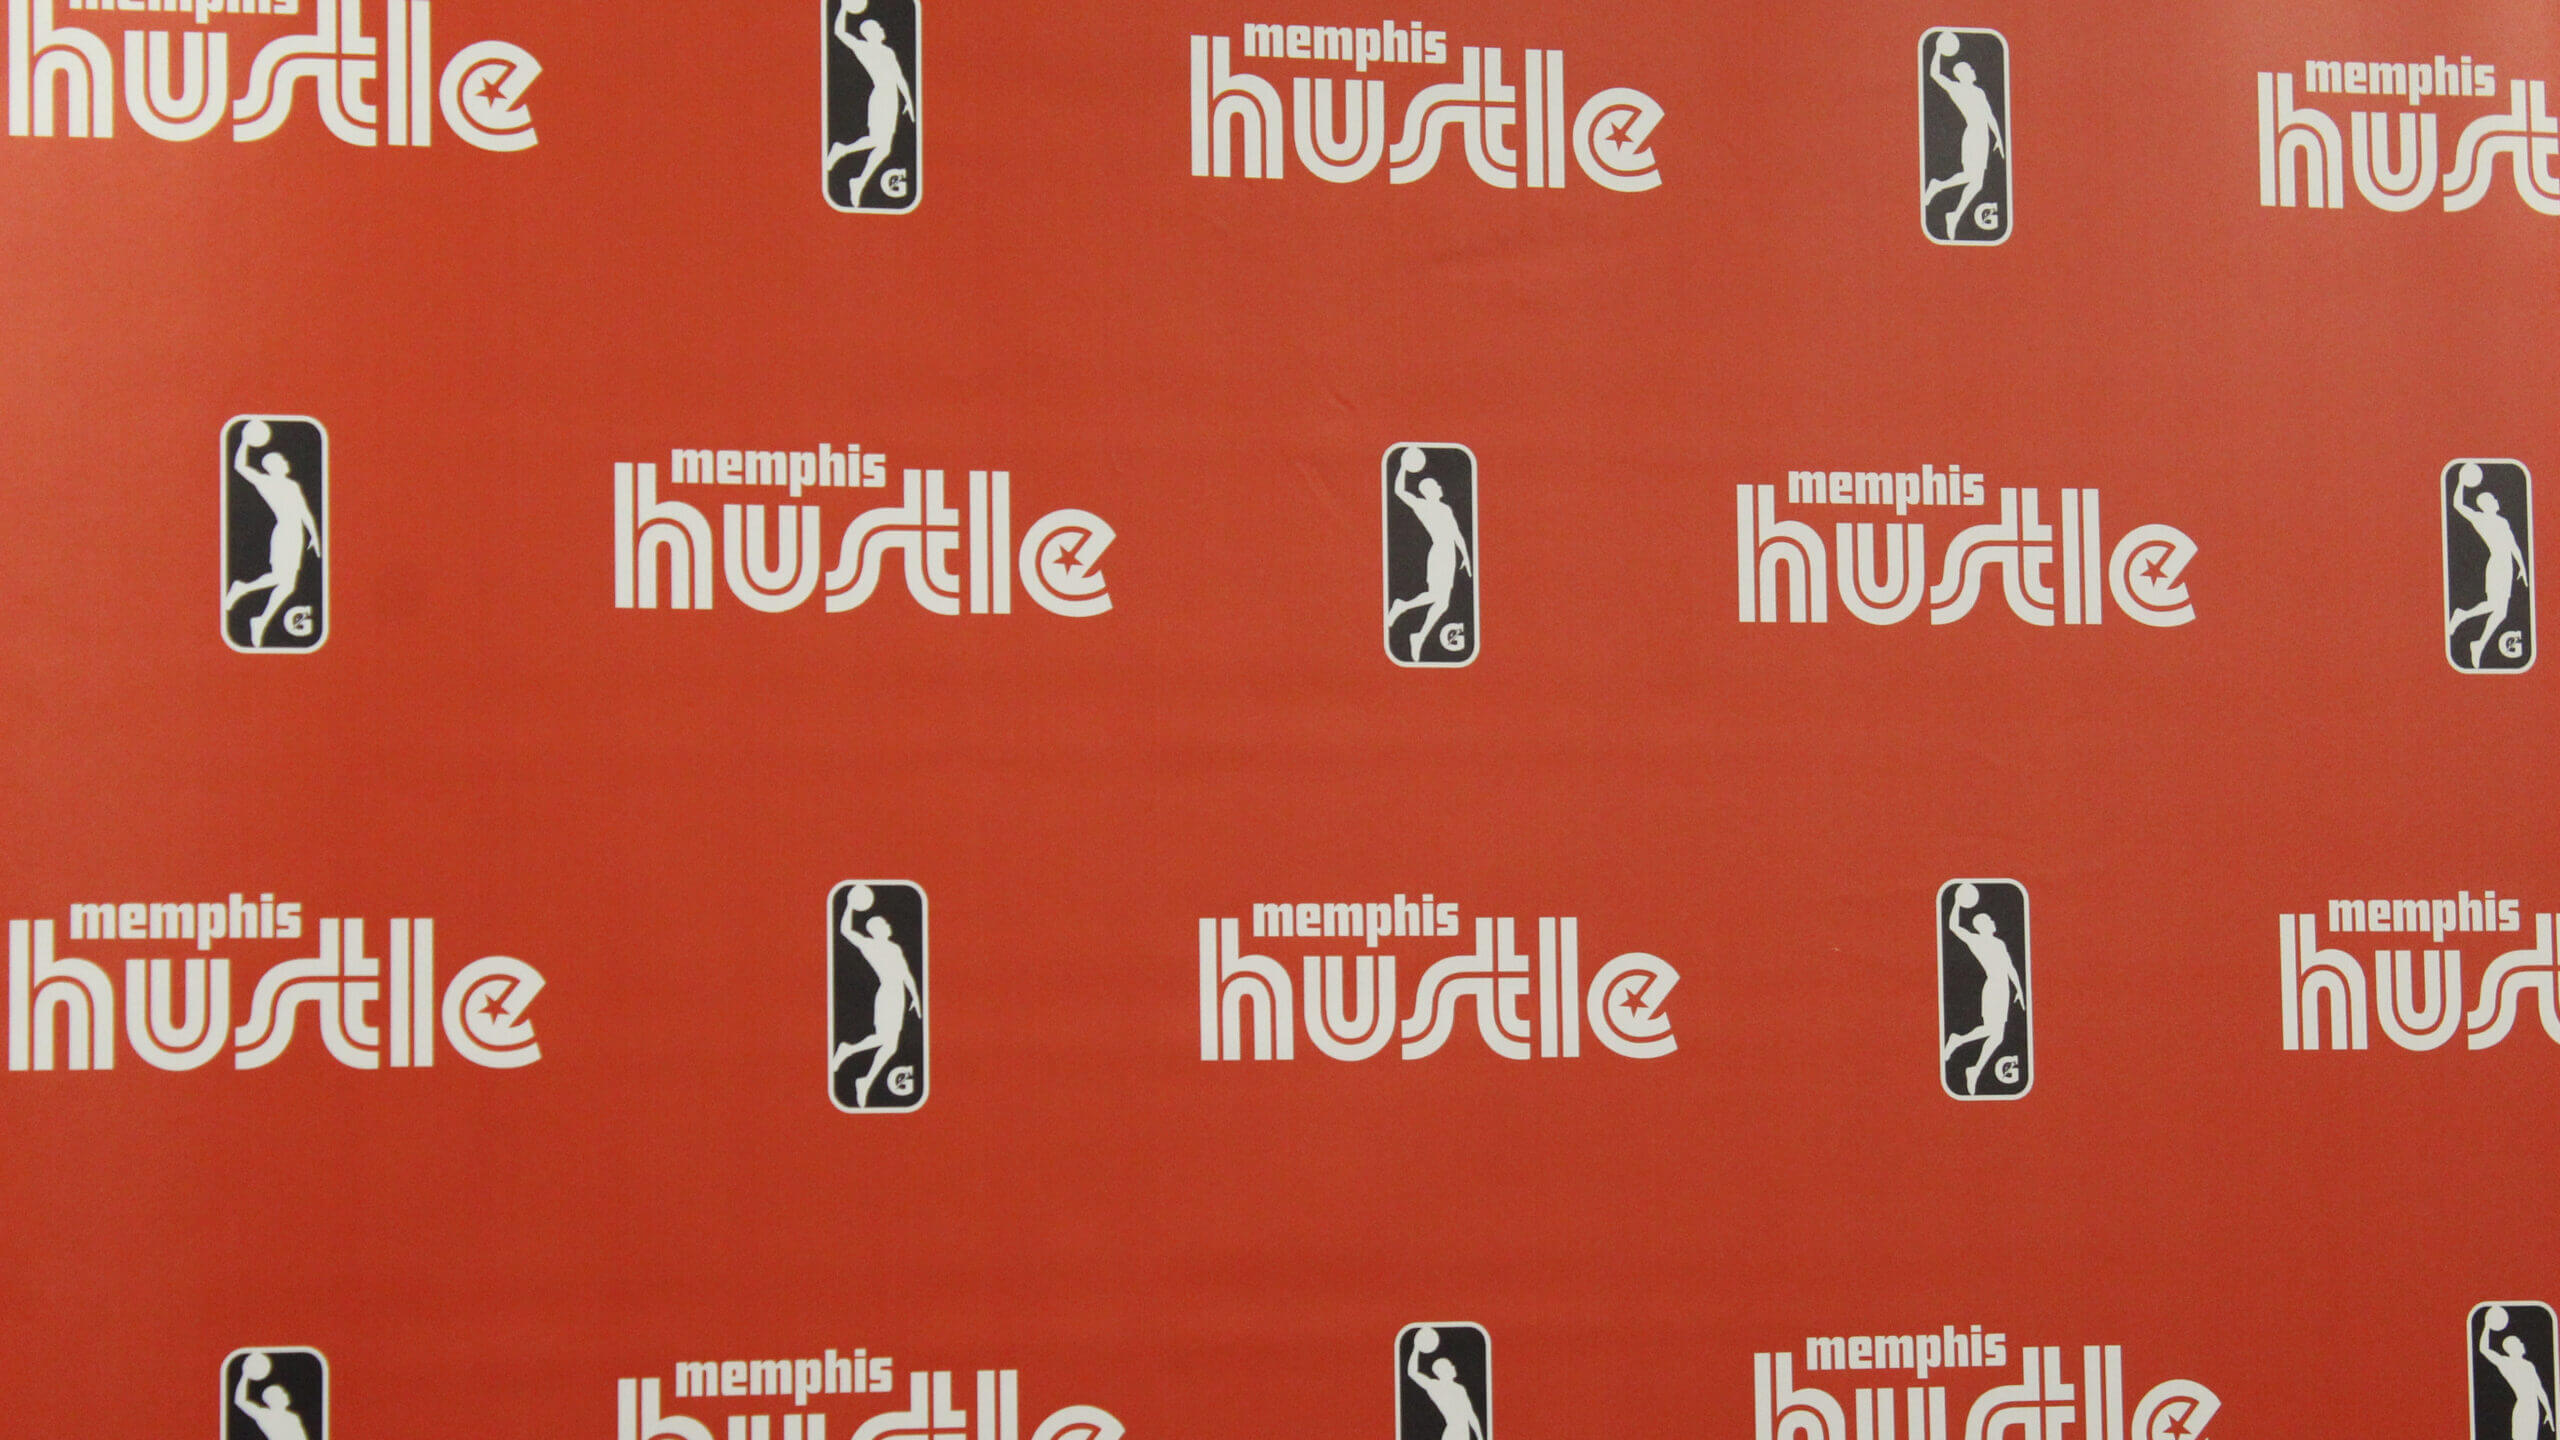 Hustle finish Showcase Cup with second loss to Squadron